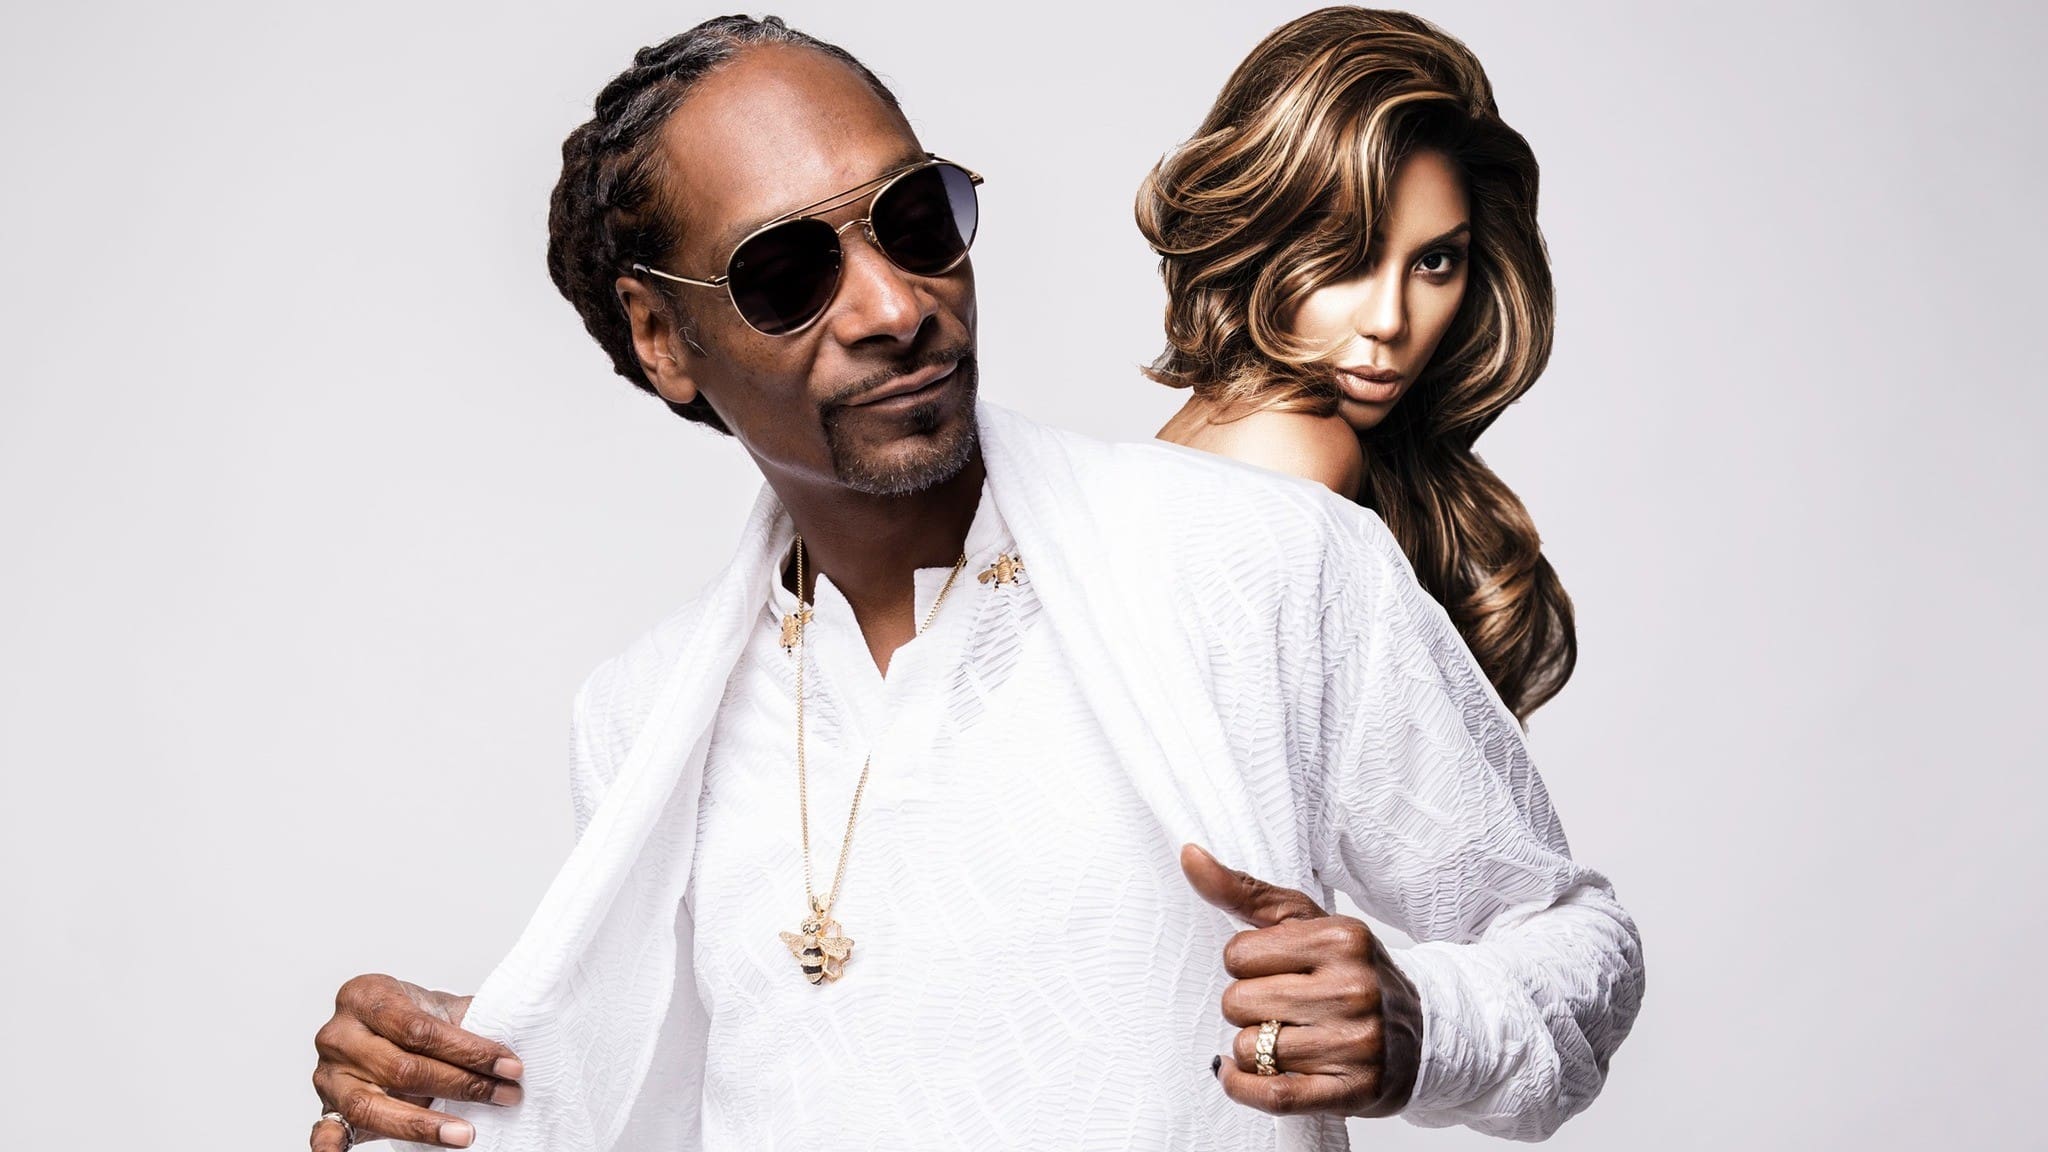 ”tamar-braxton-is-back-with-her-brother-snoop-dogg-check-out-their-funny-photo-together”